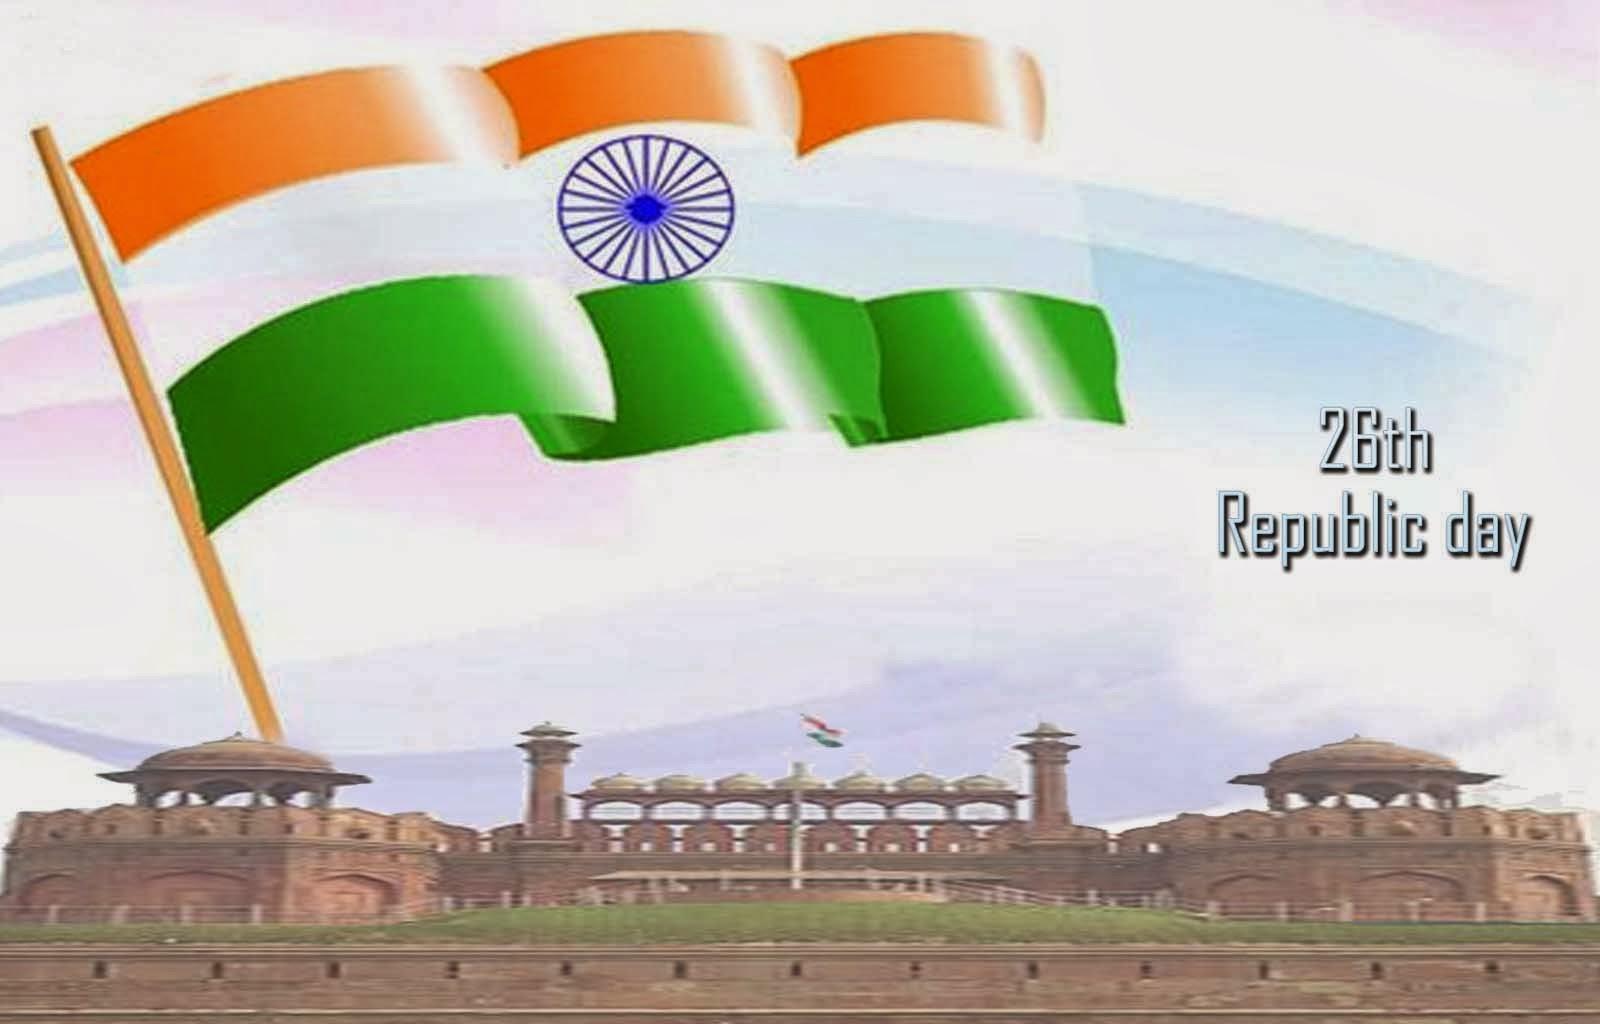 Free download 2015 India Republic Day HD Wallpaper Image